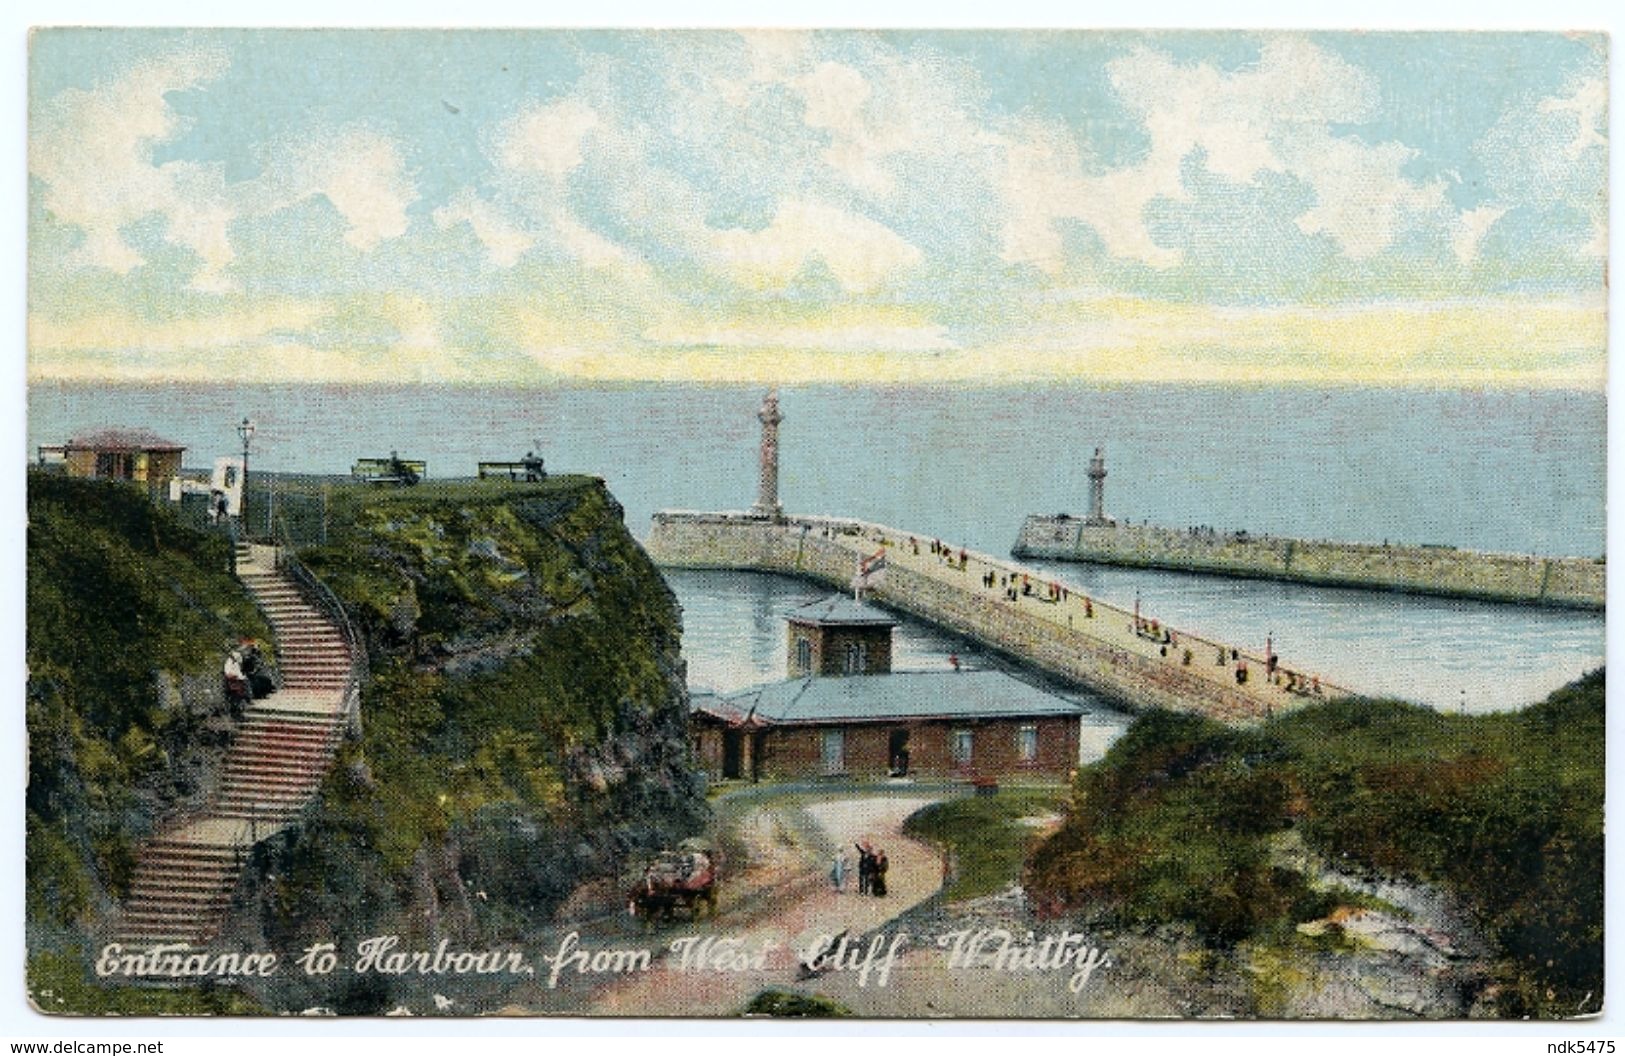 WHITBY : ENTRANCE TO HARBOUR, FROM WEST CLIFF - Whitby